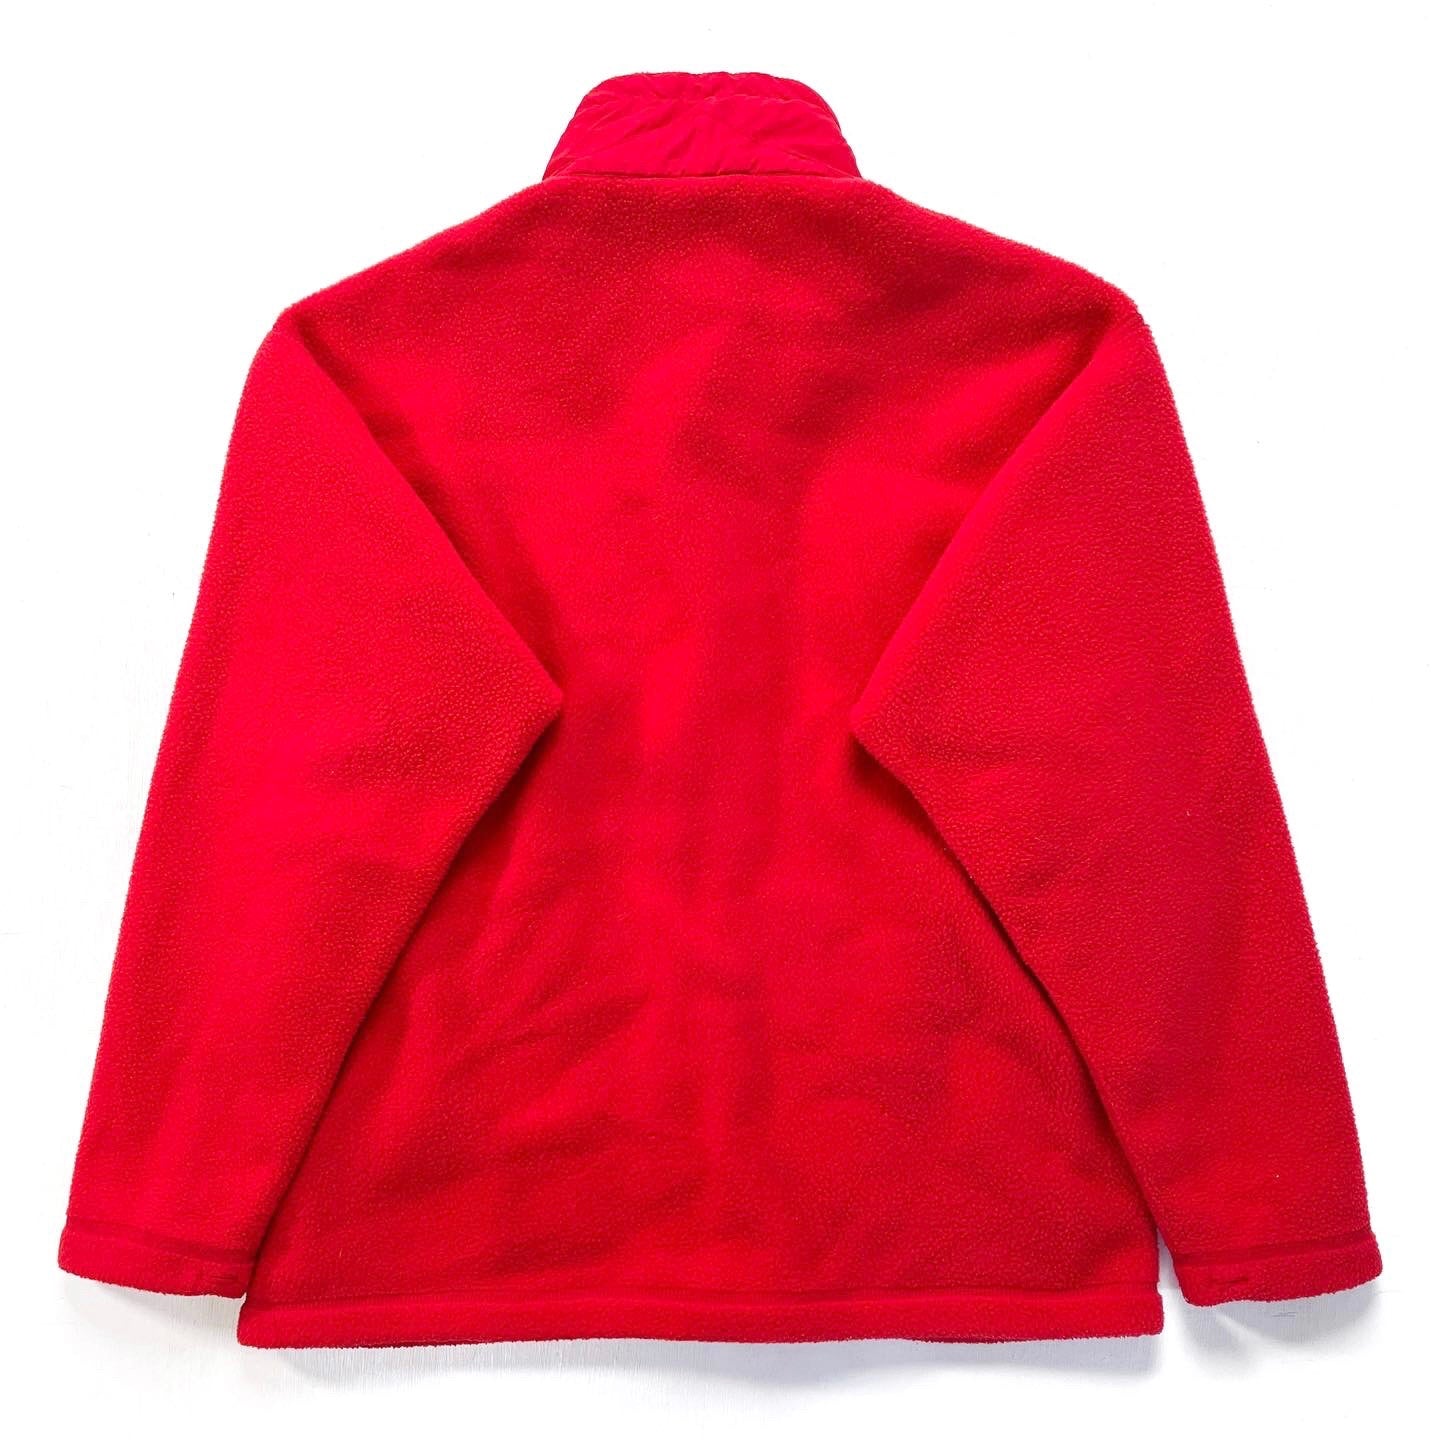 2000 Patagonia Made In The U.S.A. Synchilla Jacket, French Red (L)